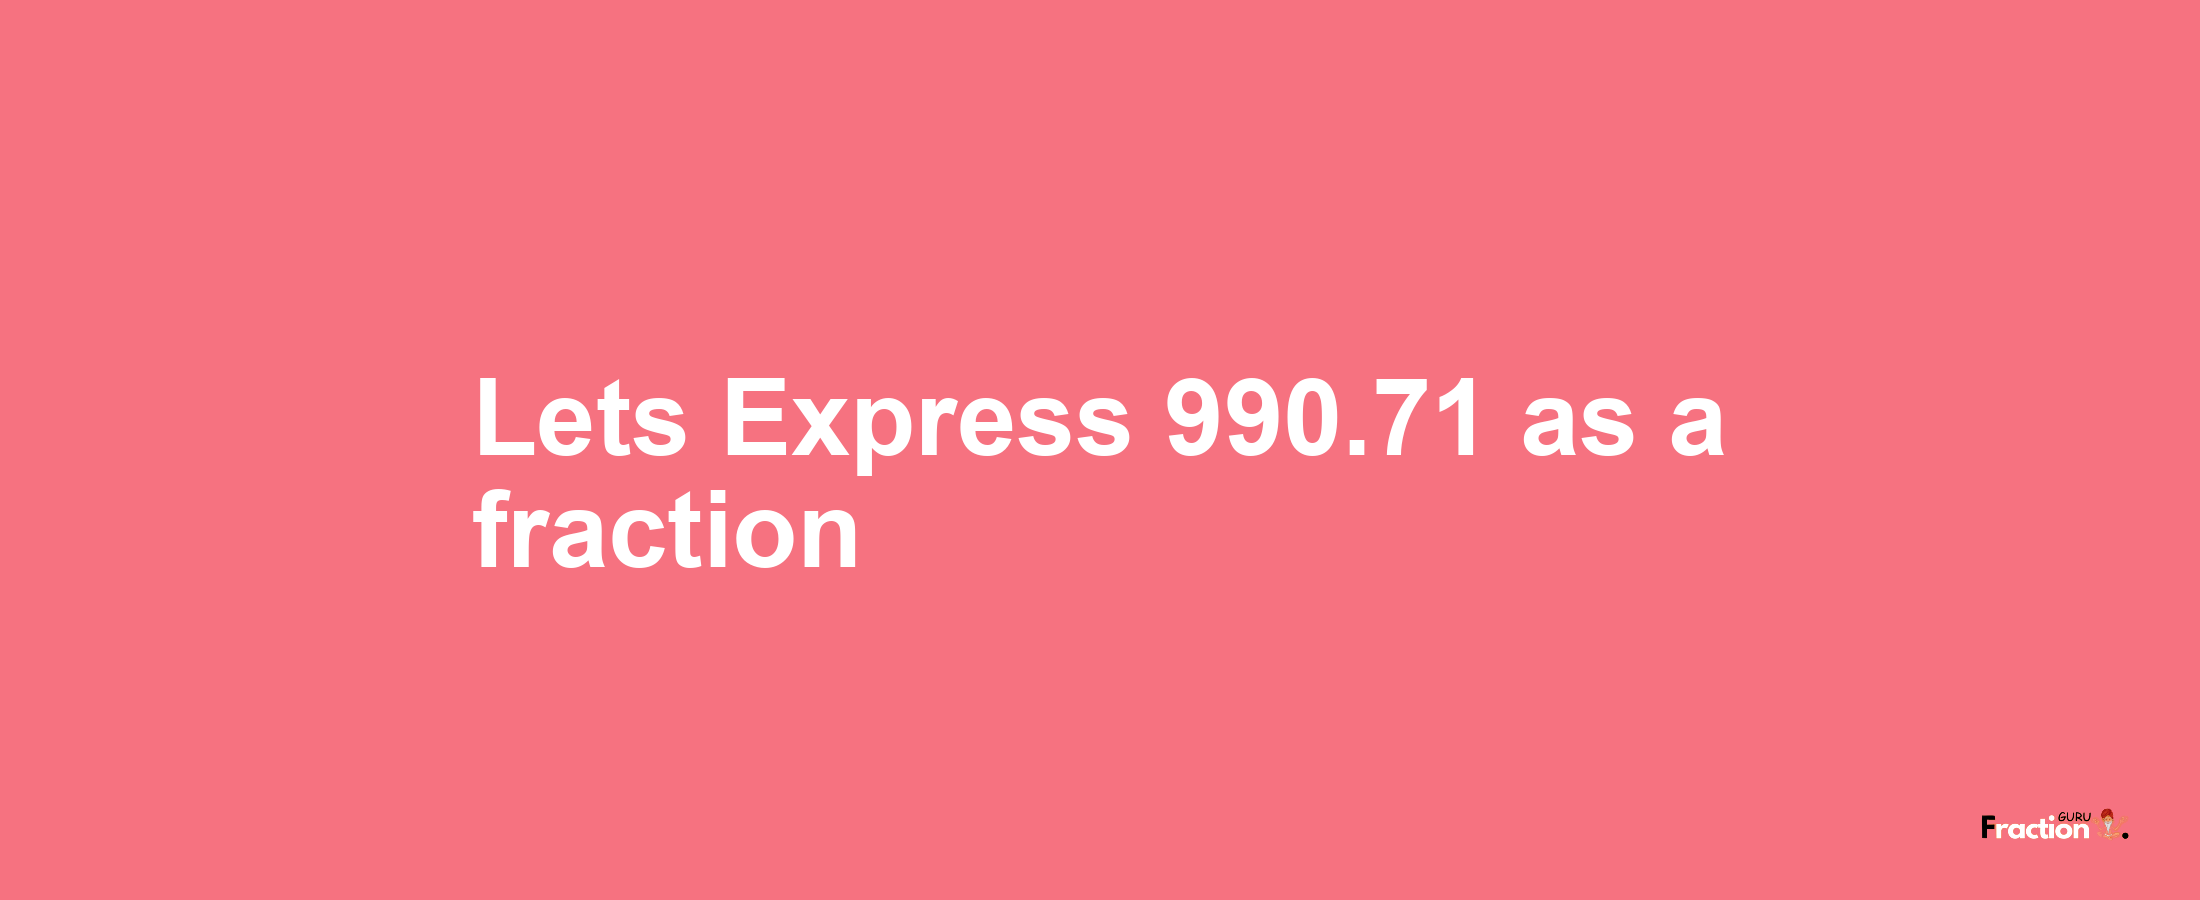 Lets Express 990.71 as afraction